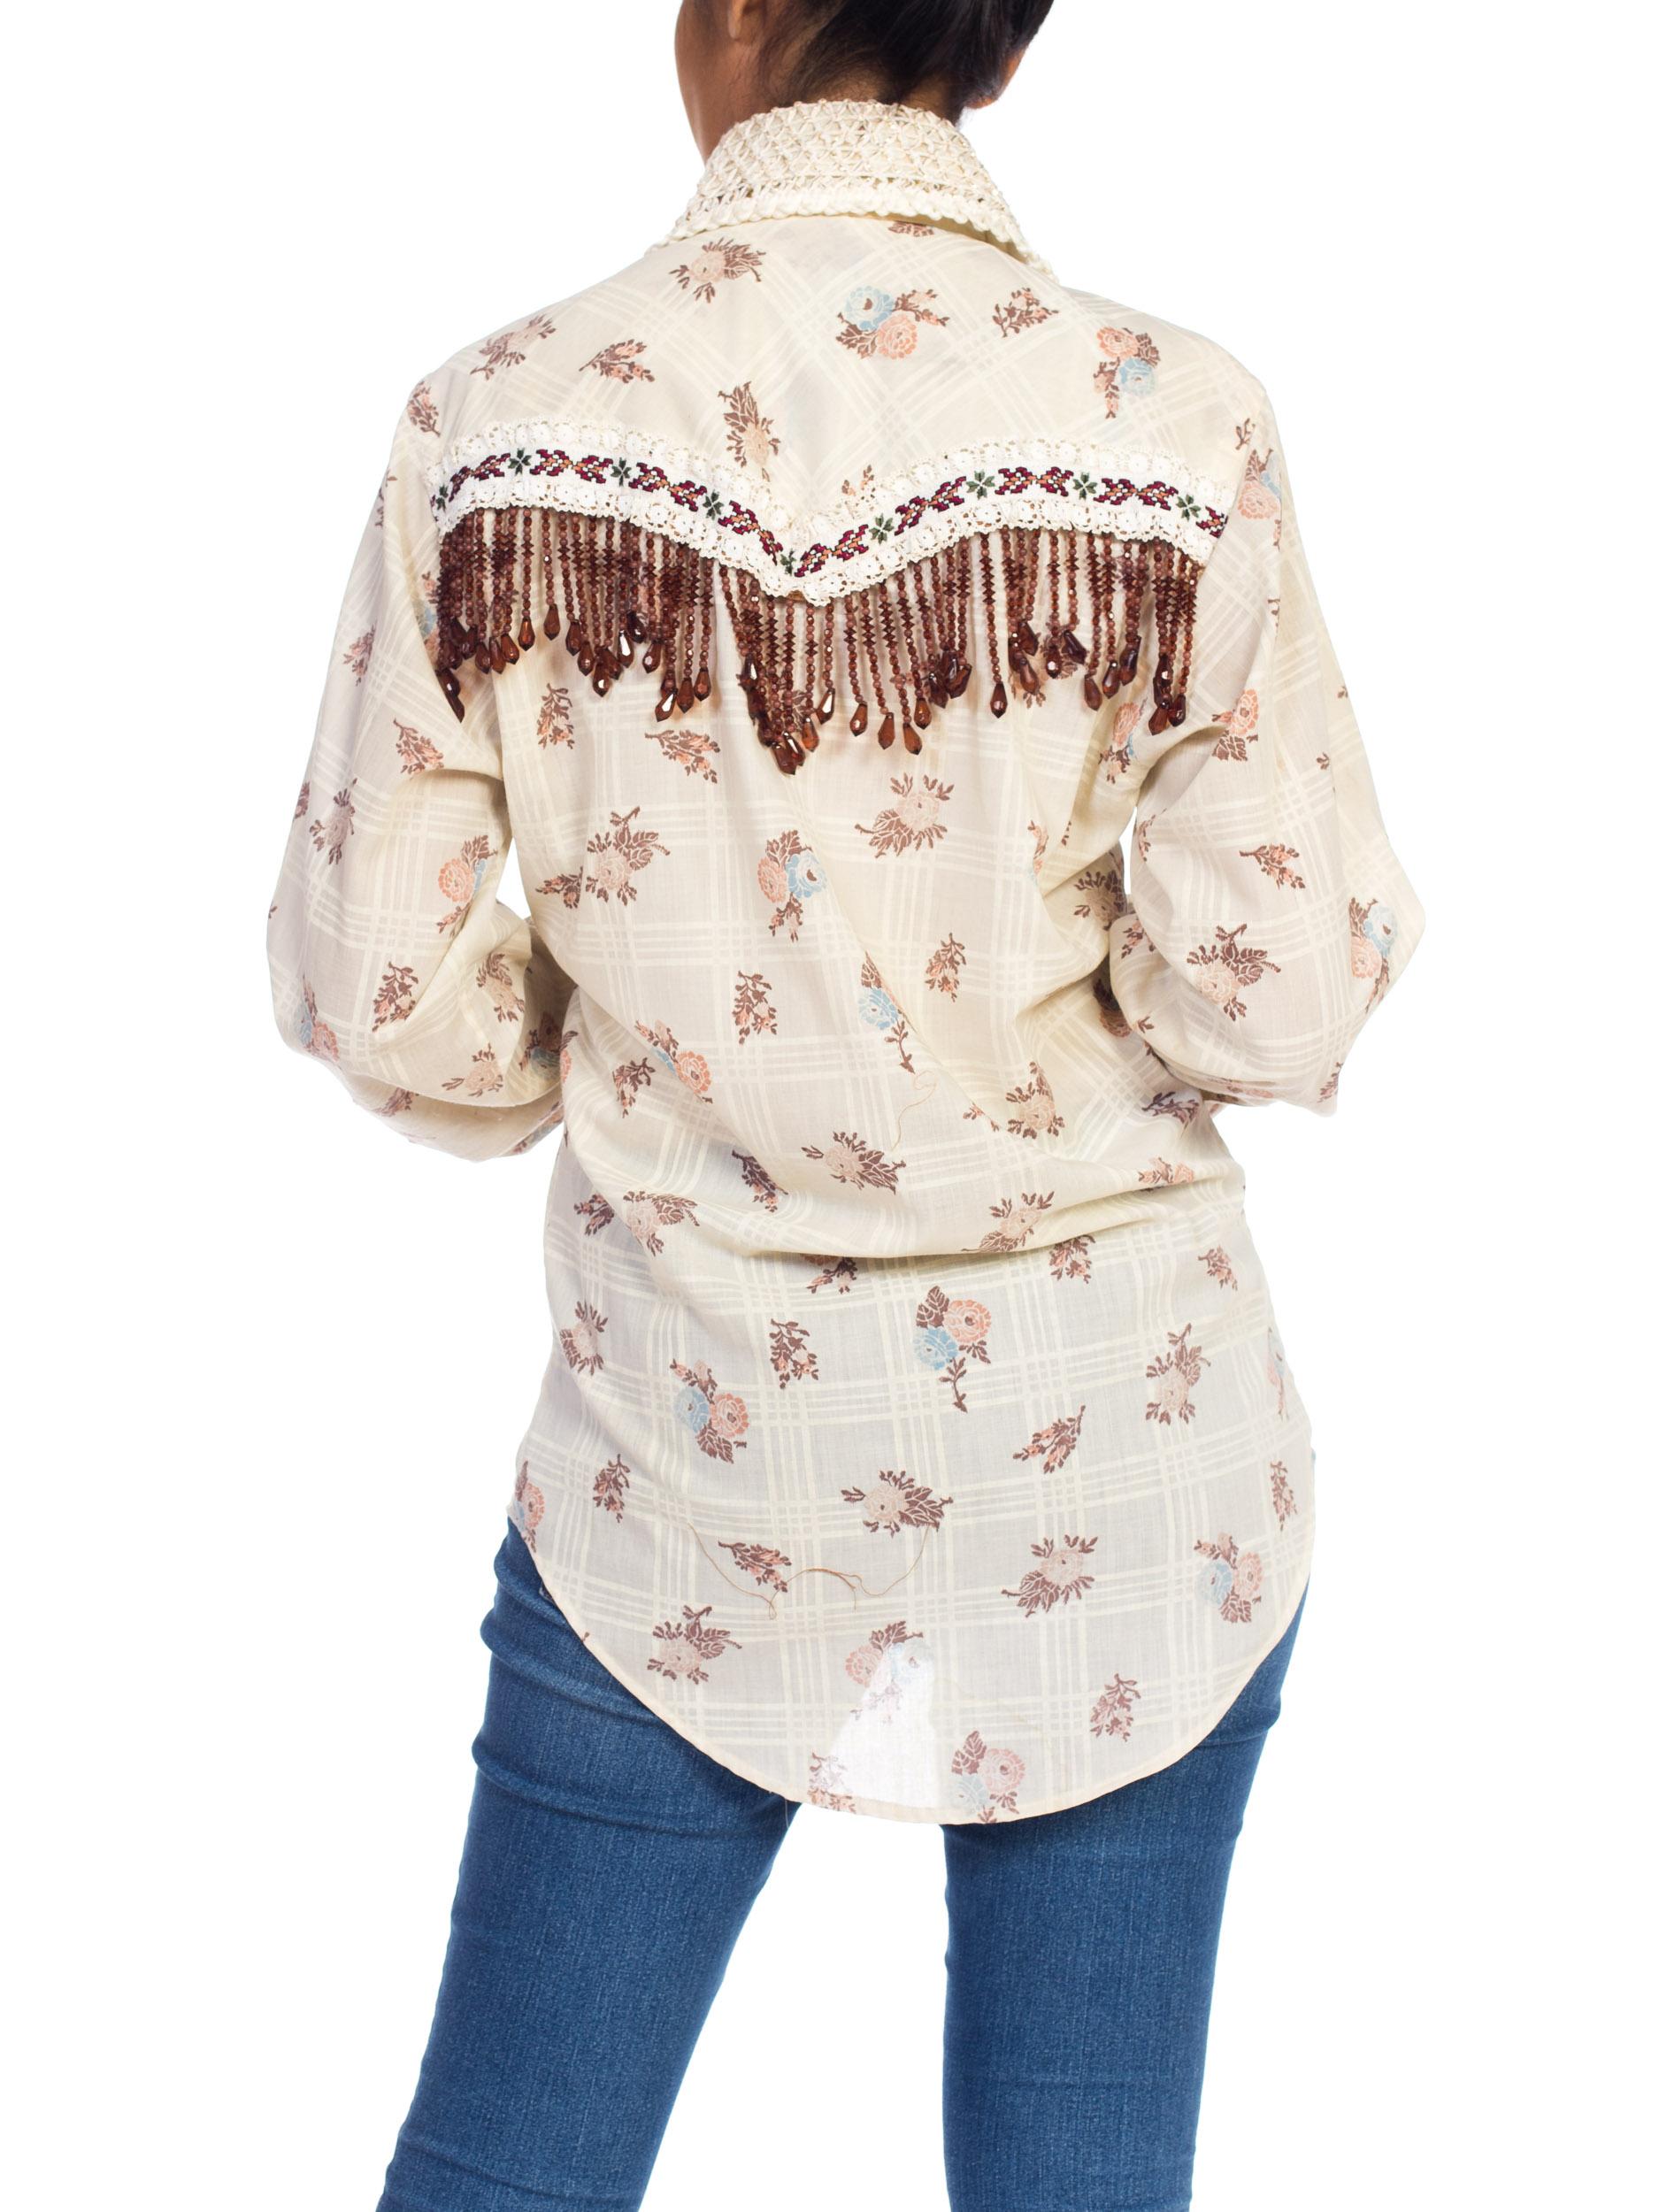 1970s Wrangler Floral Print Western Top With Lace and Ribbon 4